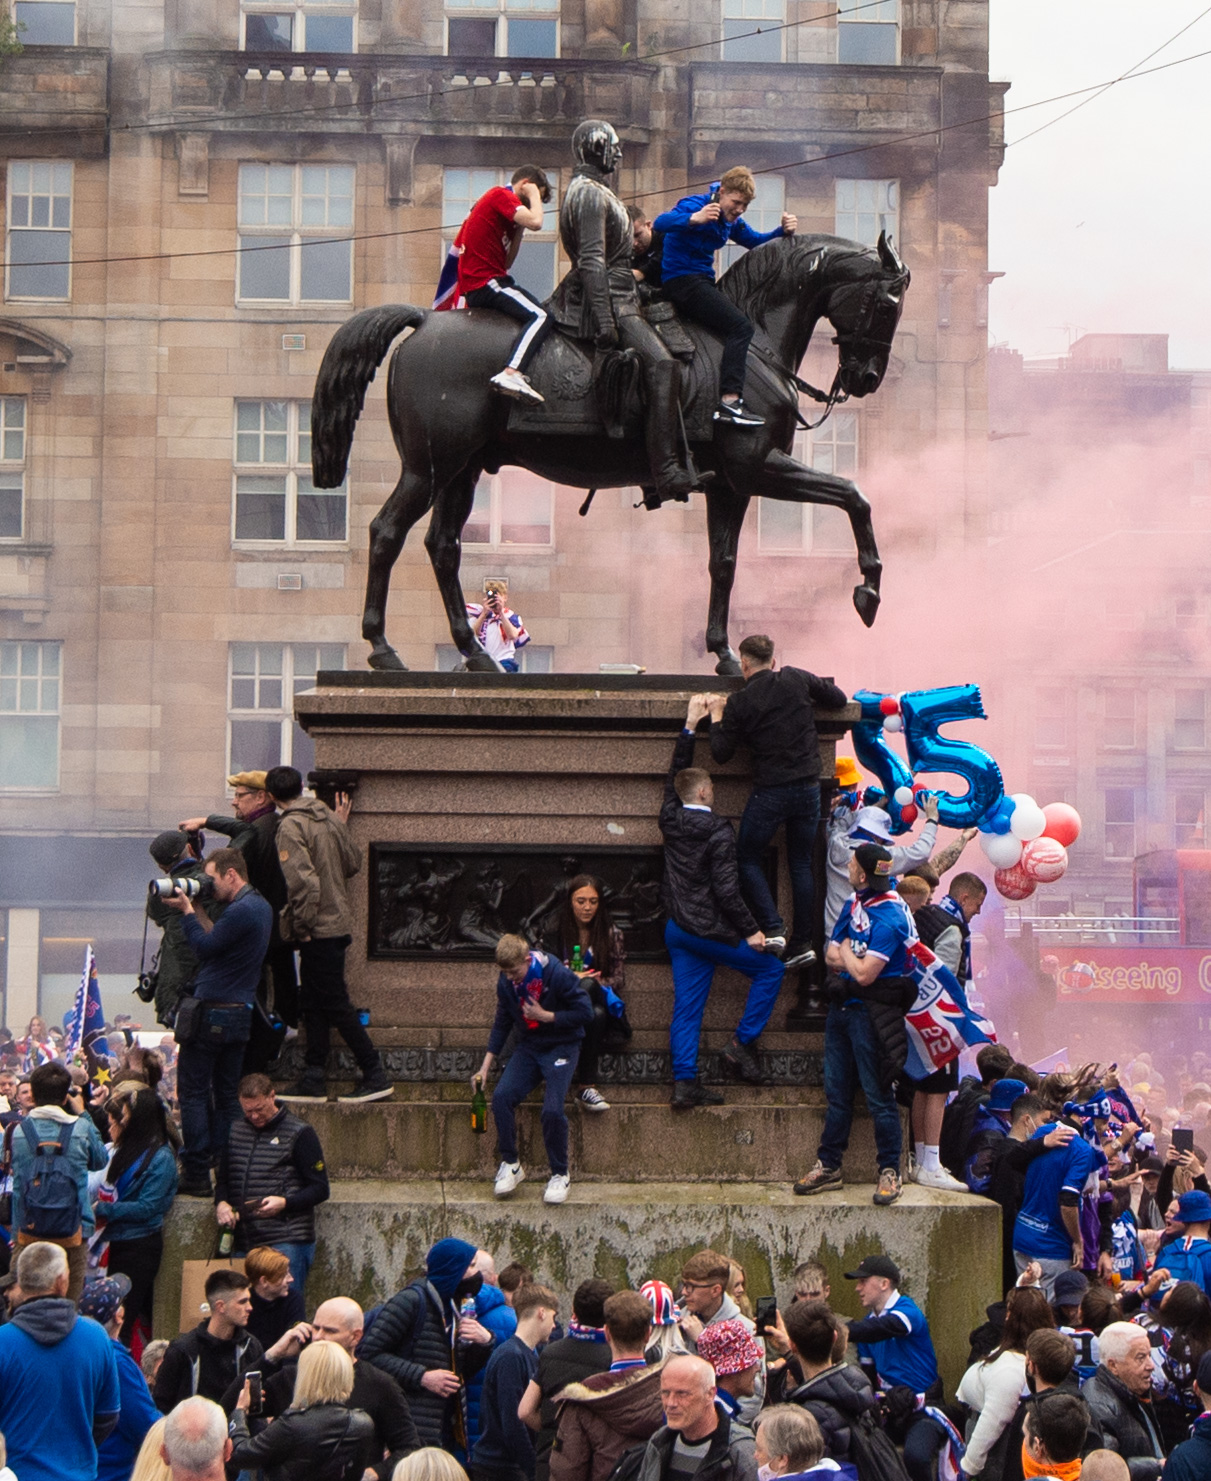 Rangers fans celebrate lifting the Scottish Premiership title at George Square (Euan Cherry/SNS Group)